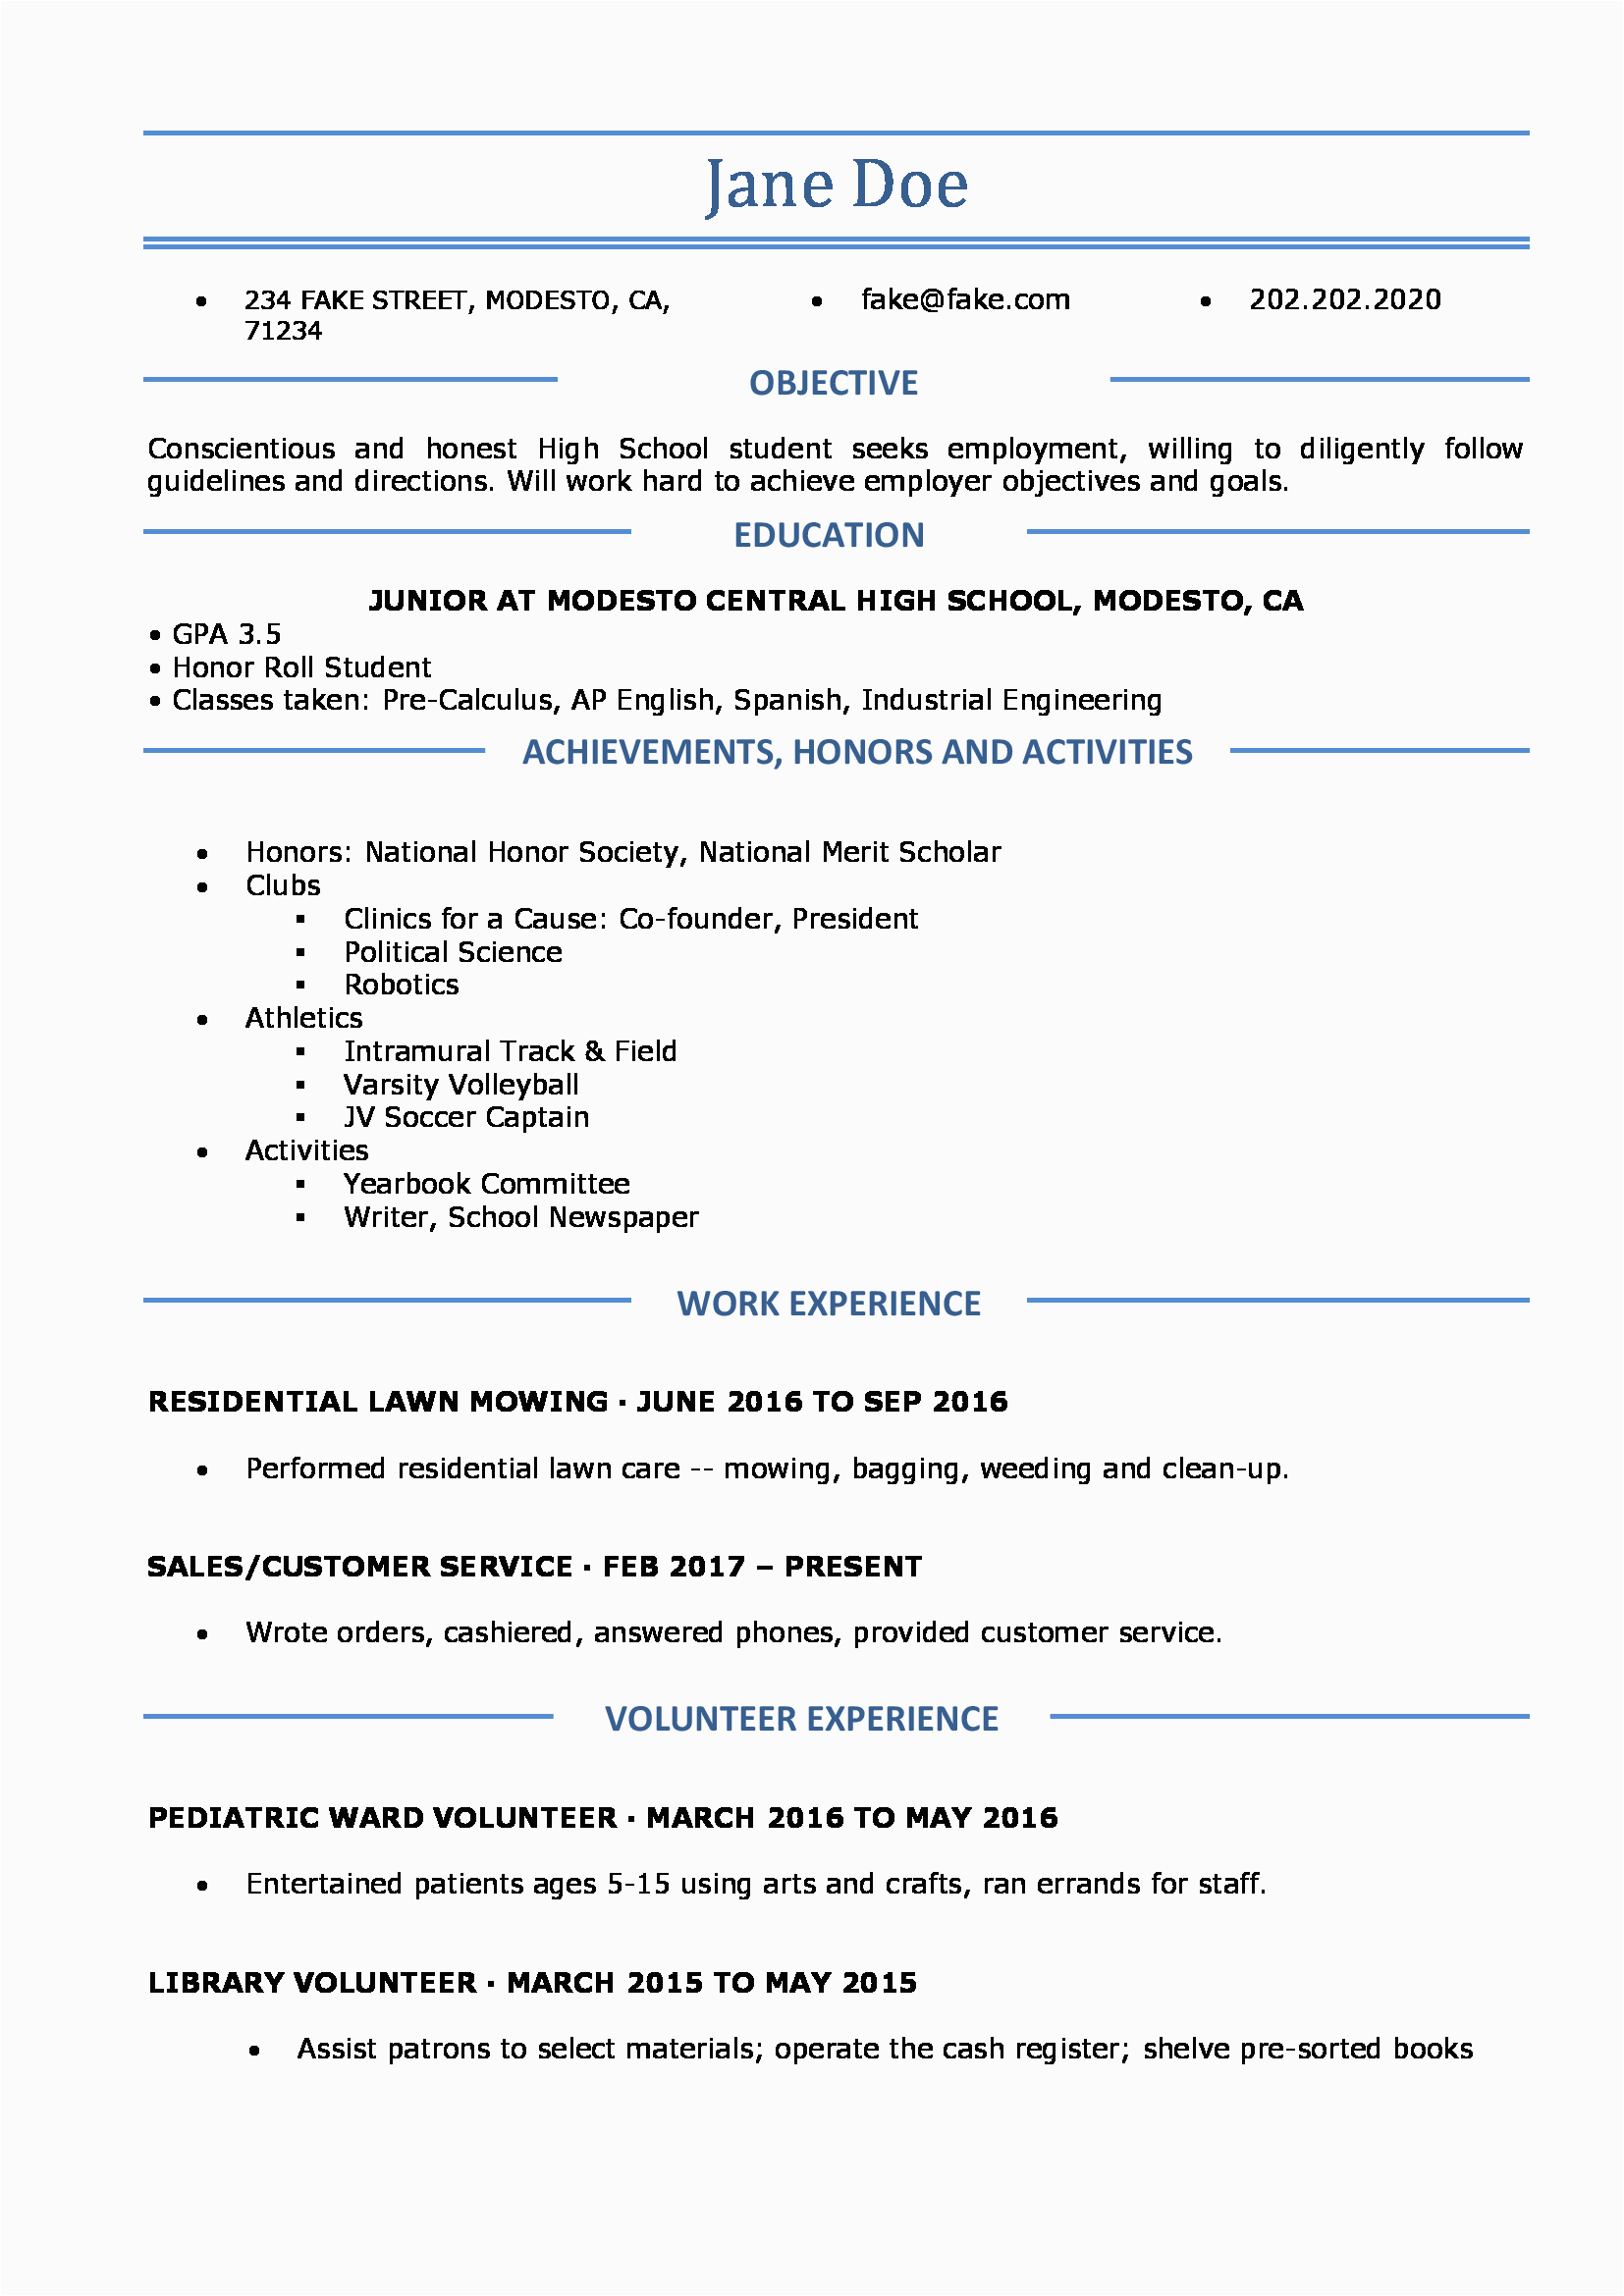 Resume Template for High School Students Australia High School Resume Resume Templates for High School